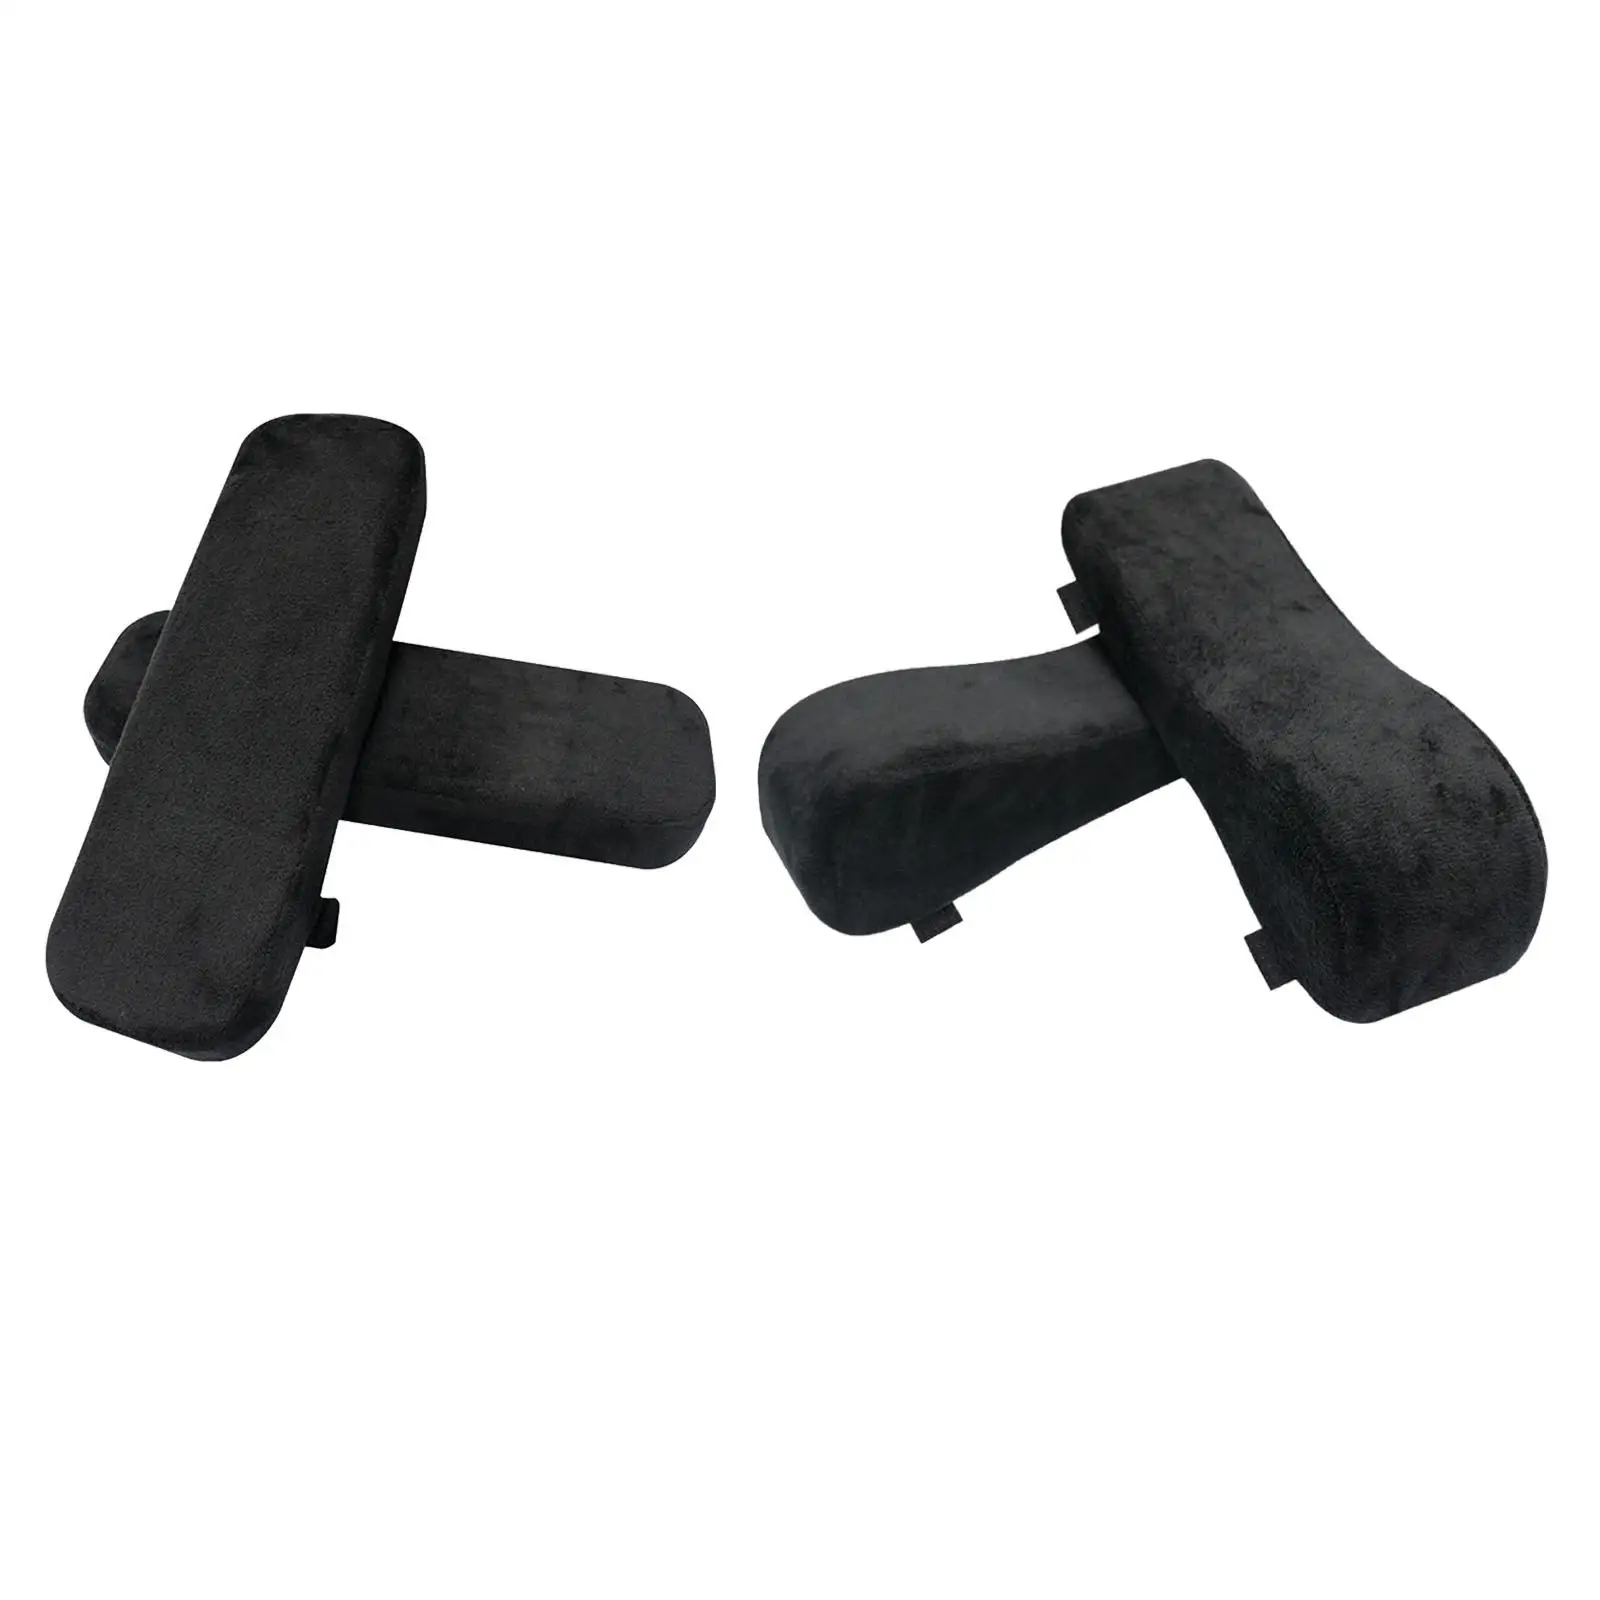 1 Pair Armrest Pads Comfort Universal Removable Armrest Covers Arm Rest Cover for Office Chair